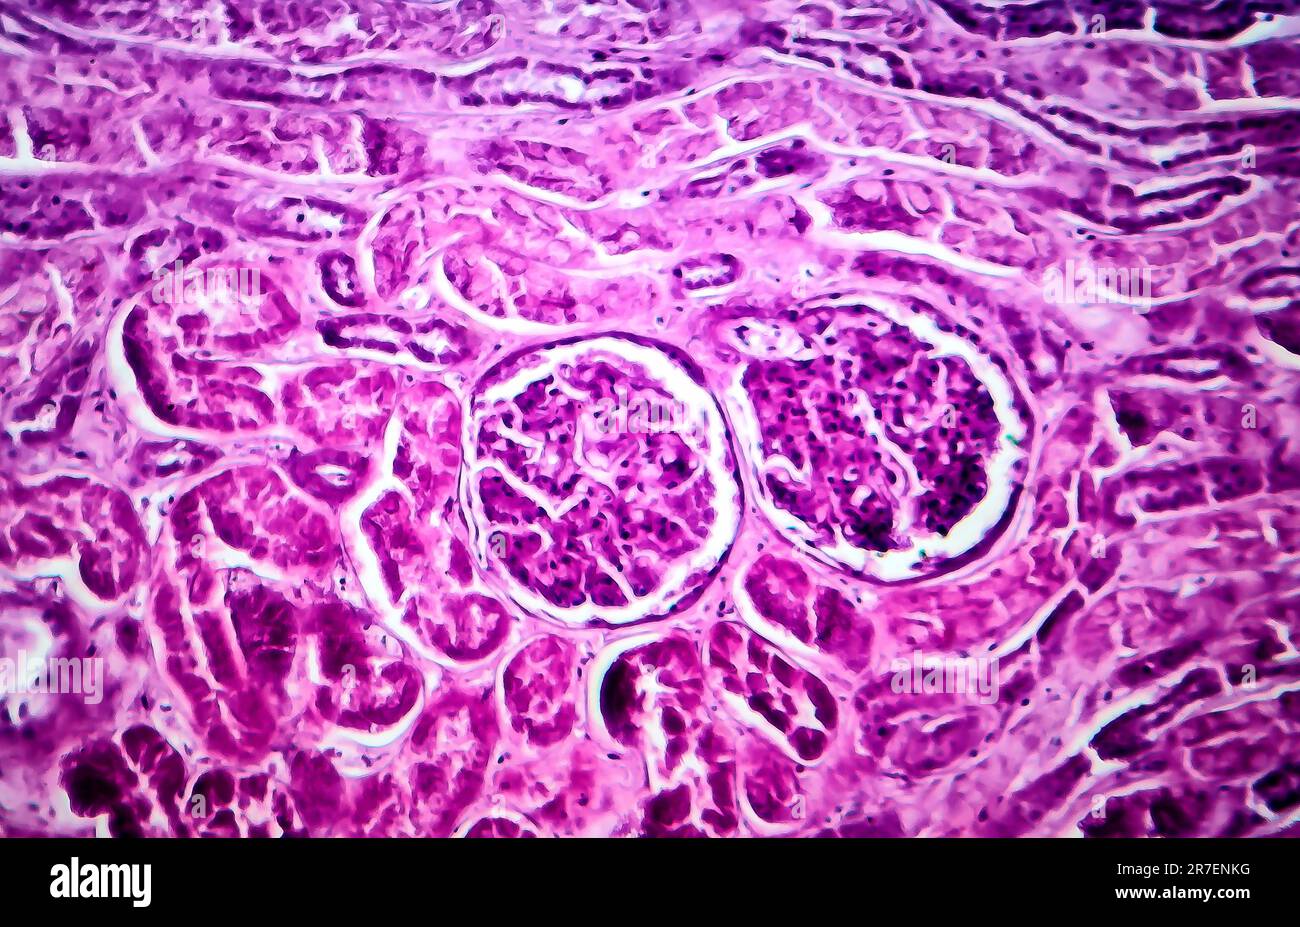 Glomerulonephritis. Light micrograph of tissue from a kidney in a case of diffuse proliferative glomerulonephritis, a form of chronic glomerulonephrit Stock Photo